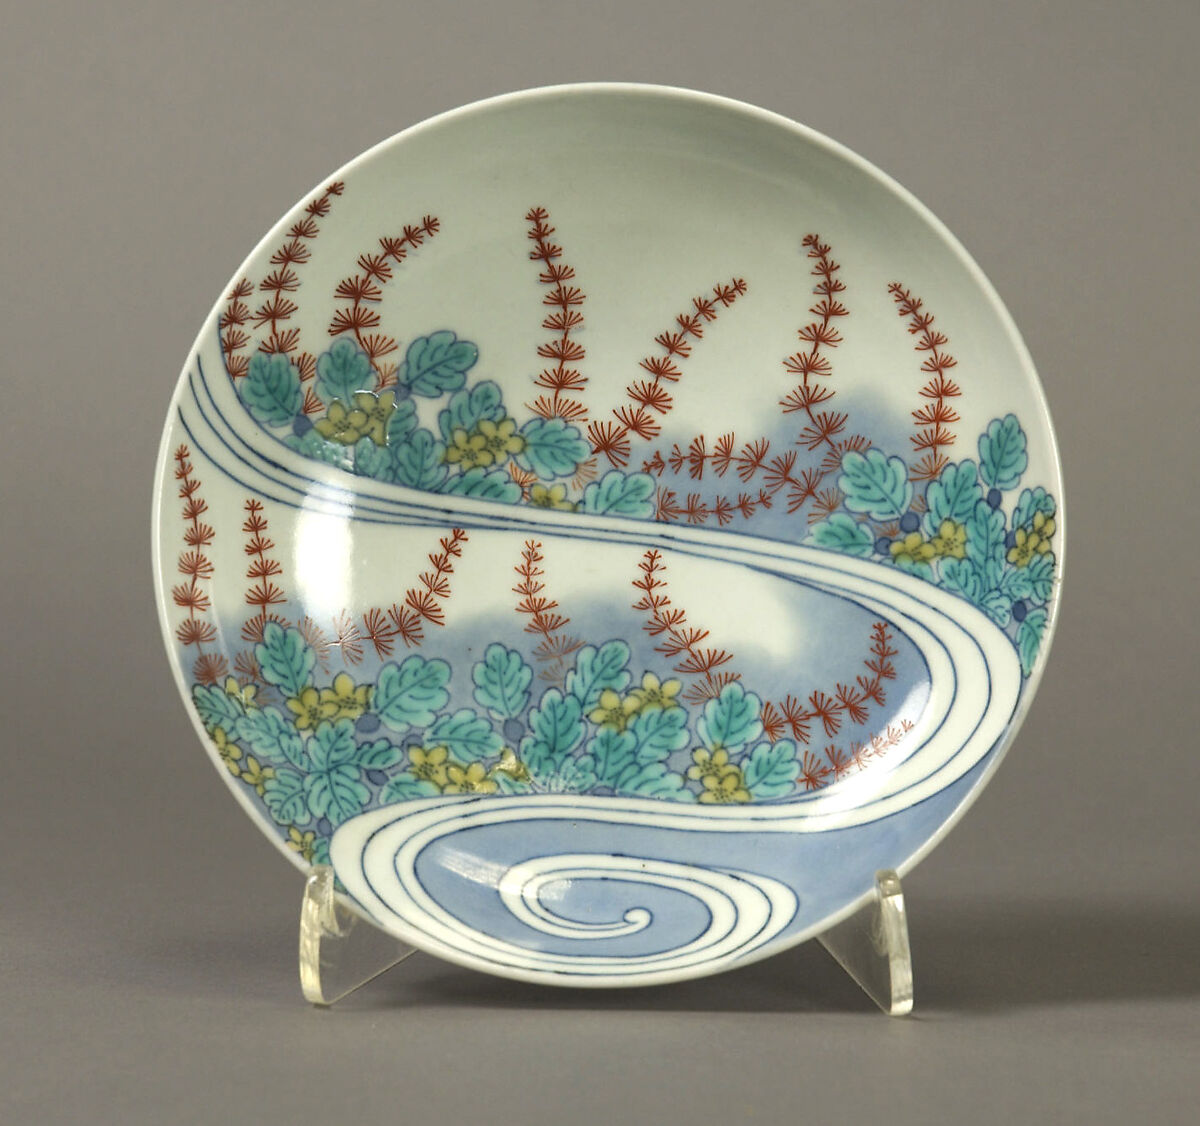 Dish with Design of Water Plants, Porcelain with underglaze blue and overglaze enamels (Hizen ware, Nabeshima type), Japan 